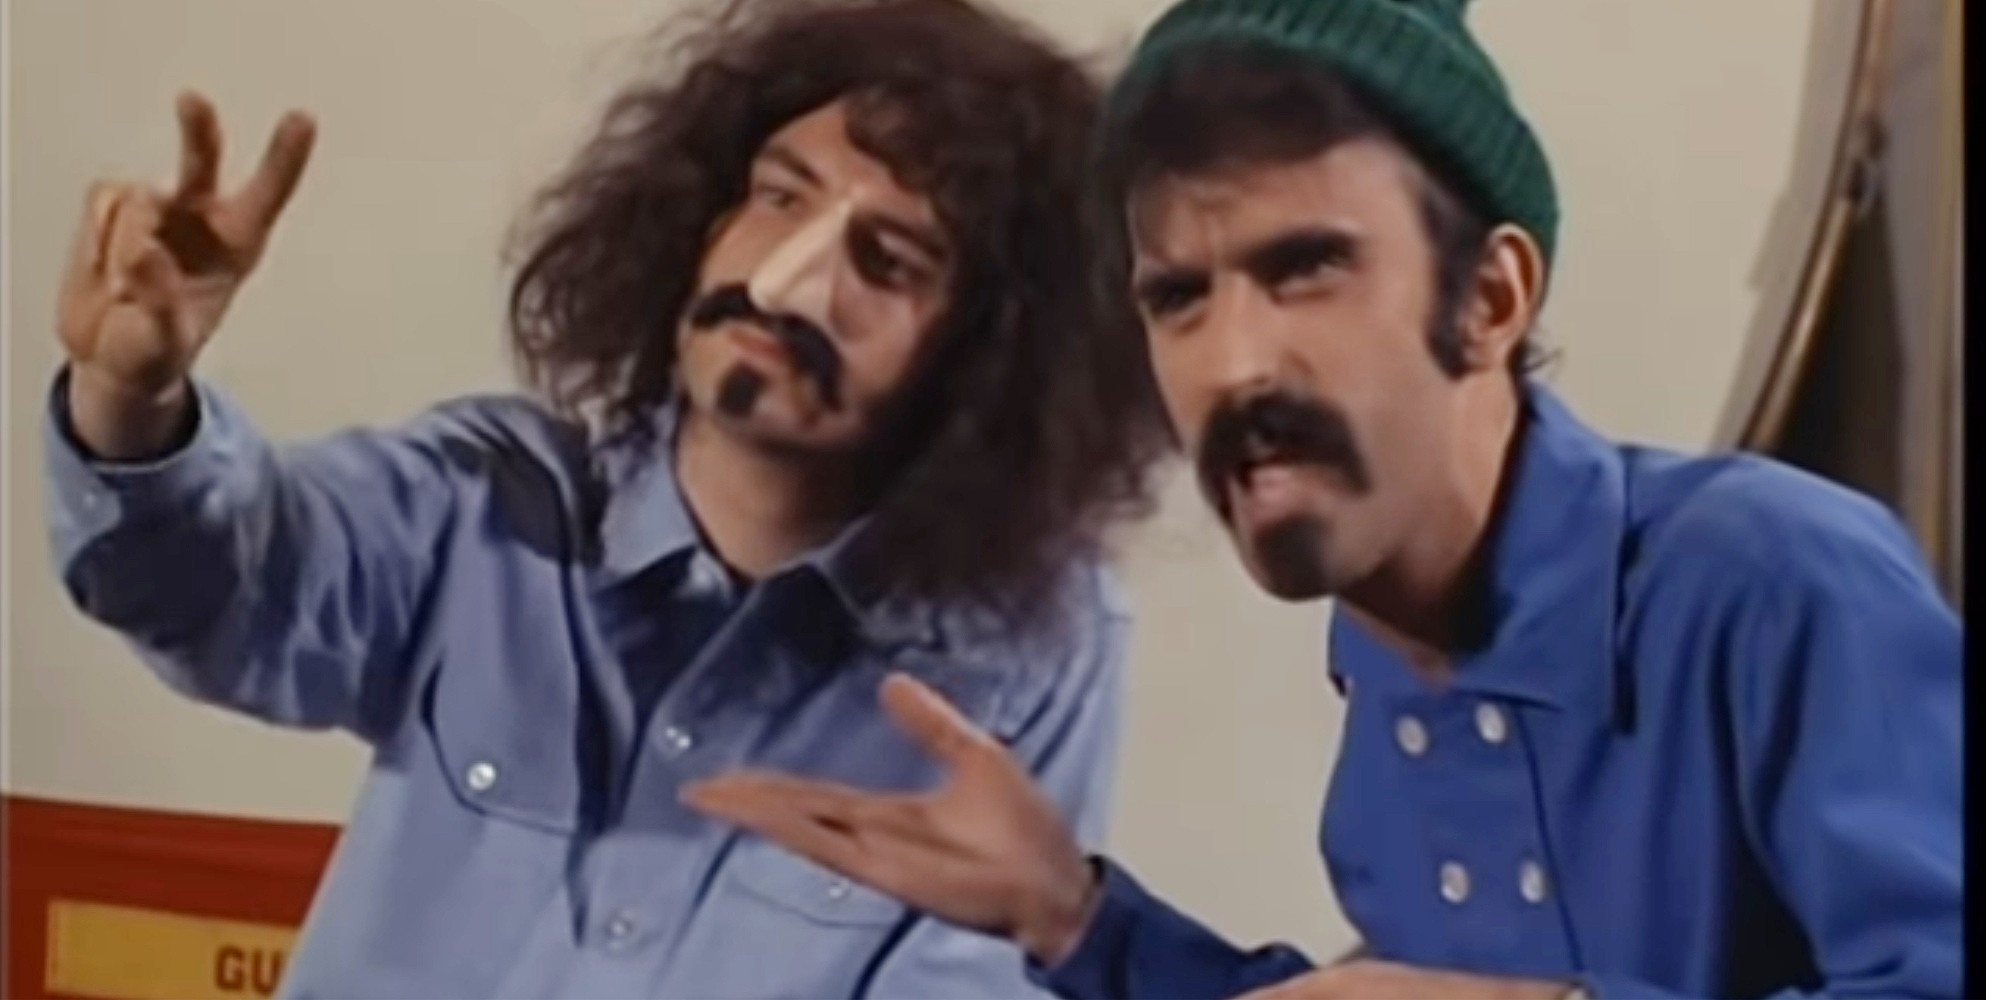 Mike Nesmith and Frank Zappa on the set of 'The Monkees' television series in 1968.